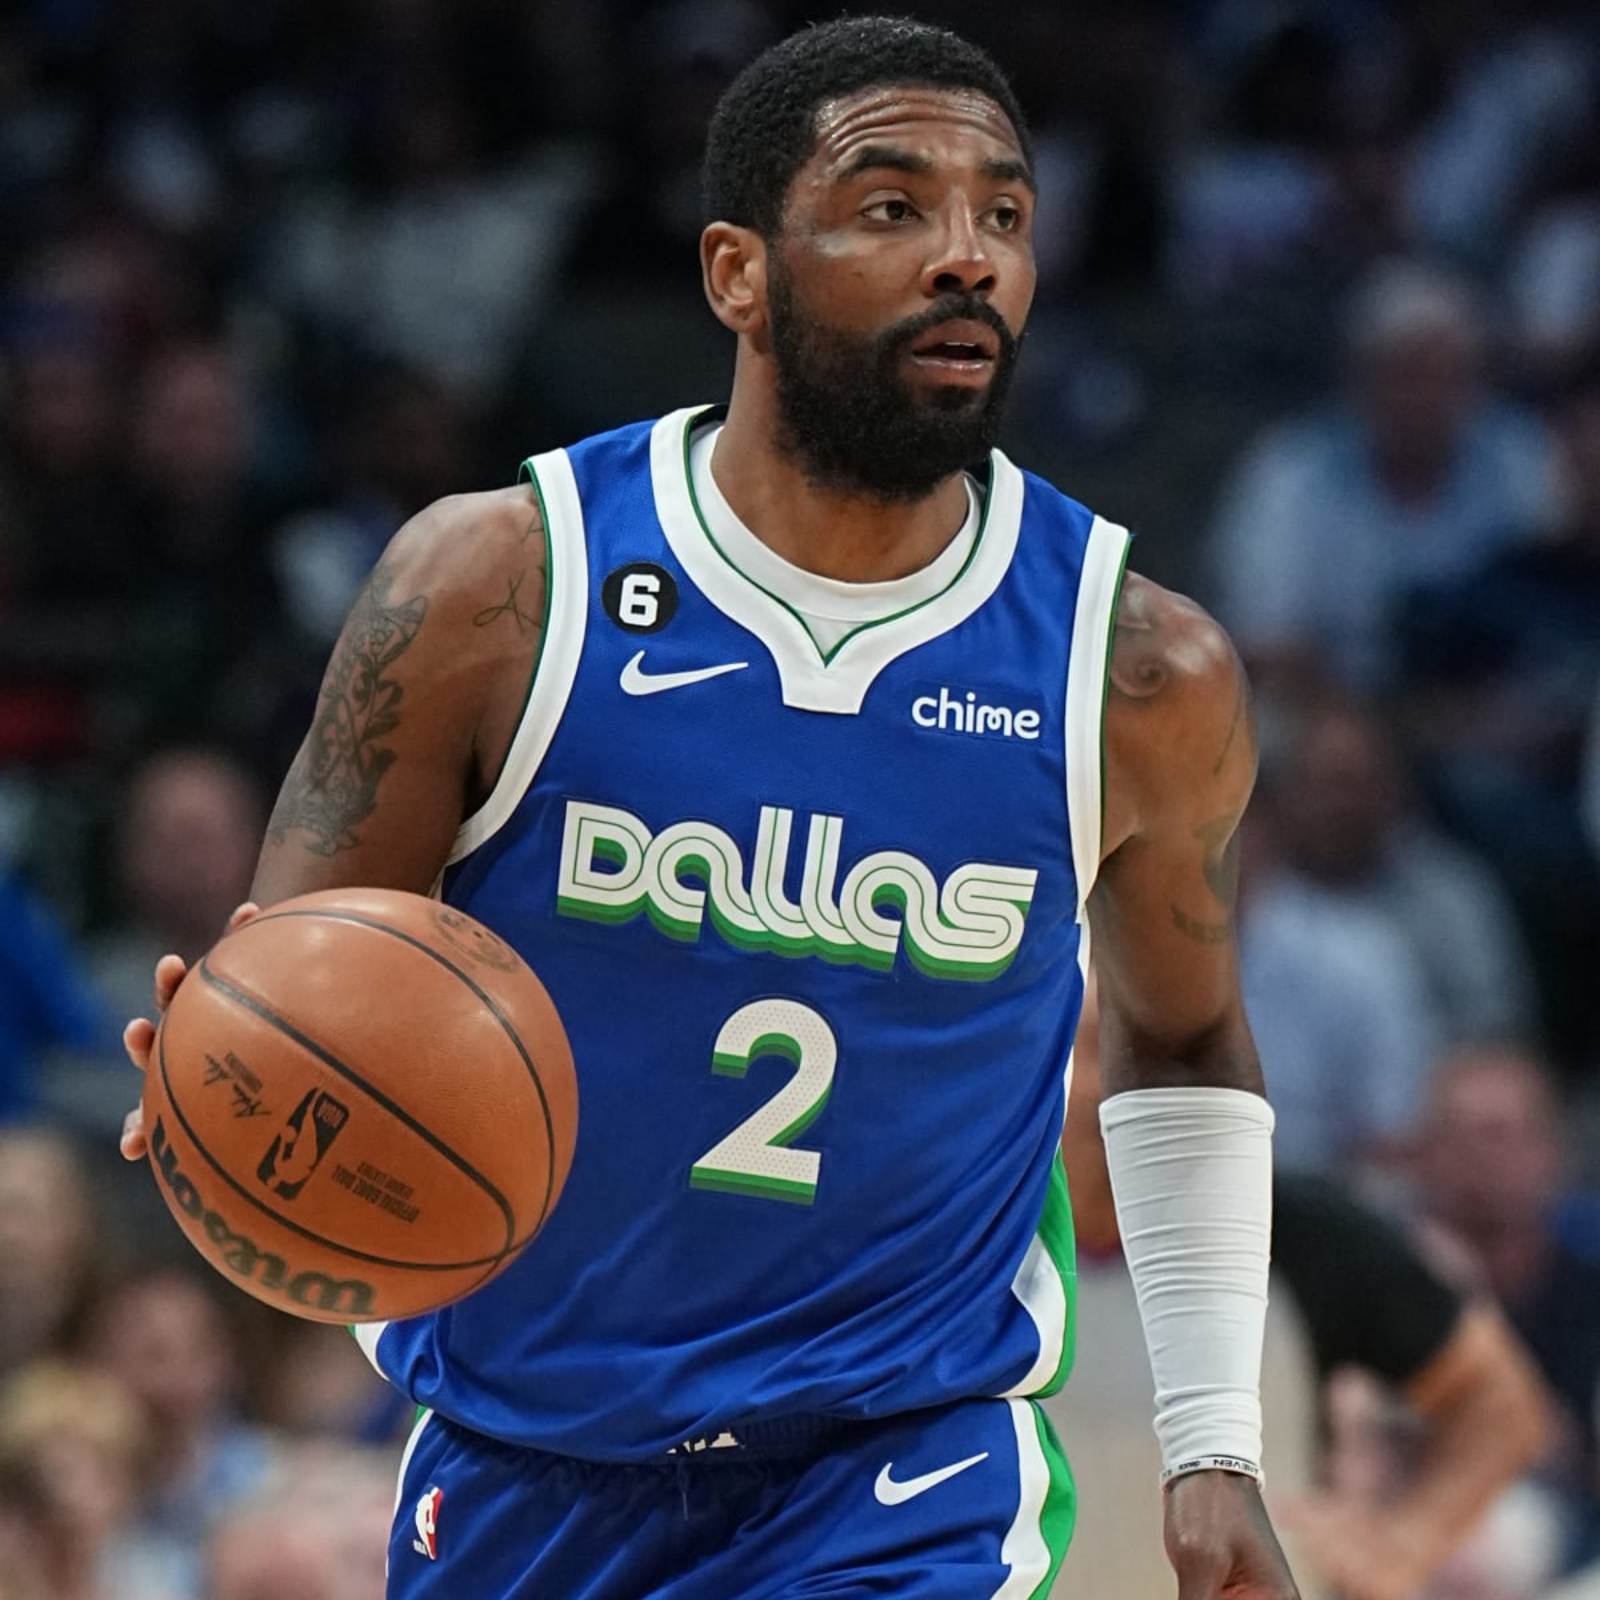 Kyrie Irving agrees to deal with Dallas Mavericks, per report – NBC 5 Dallas-Fort  Worth